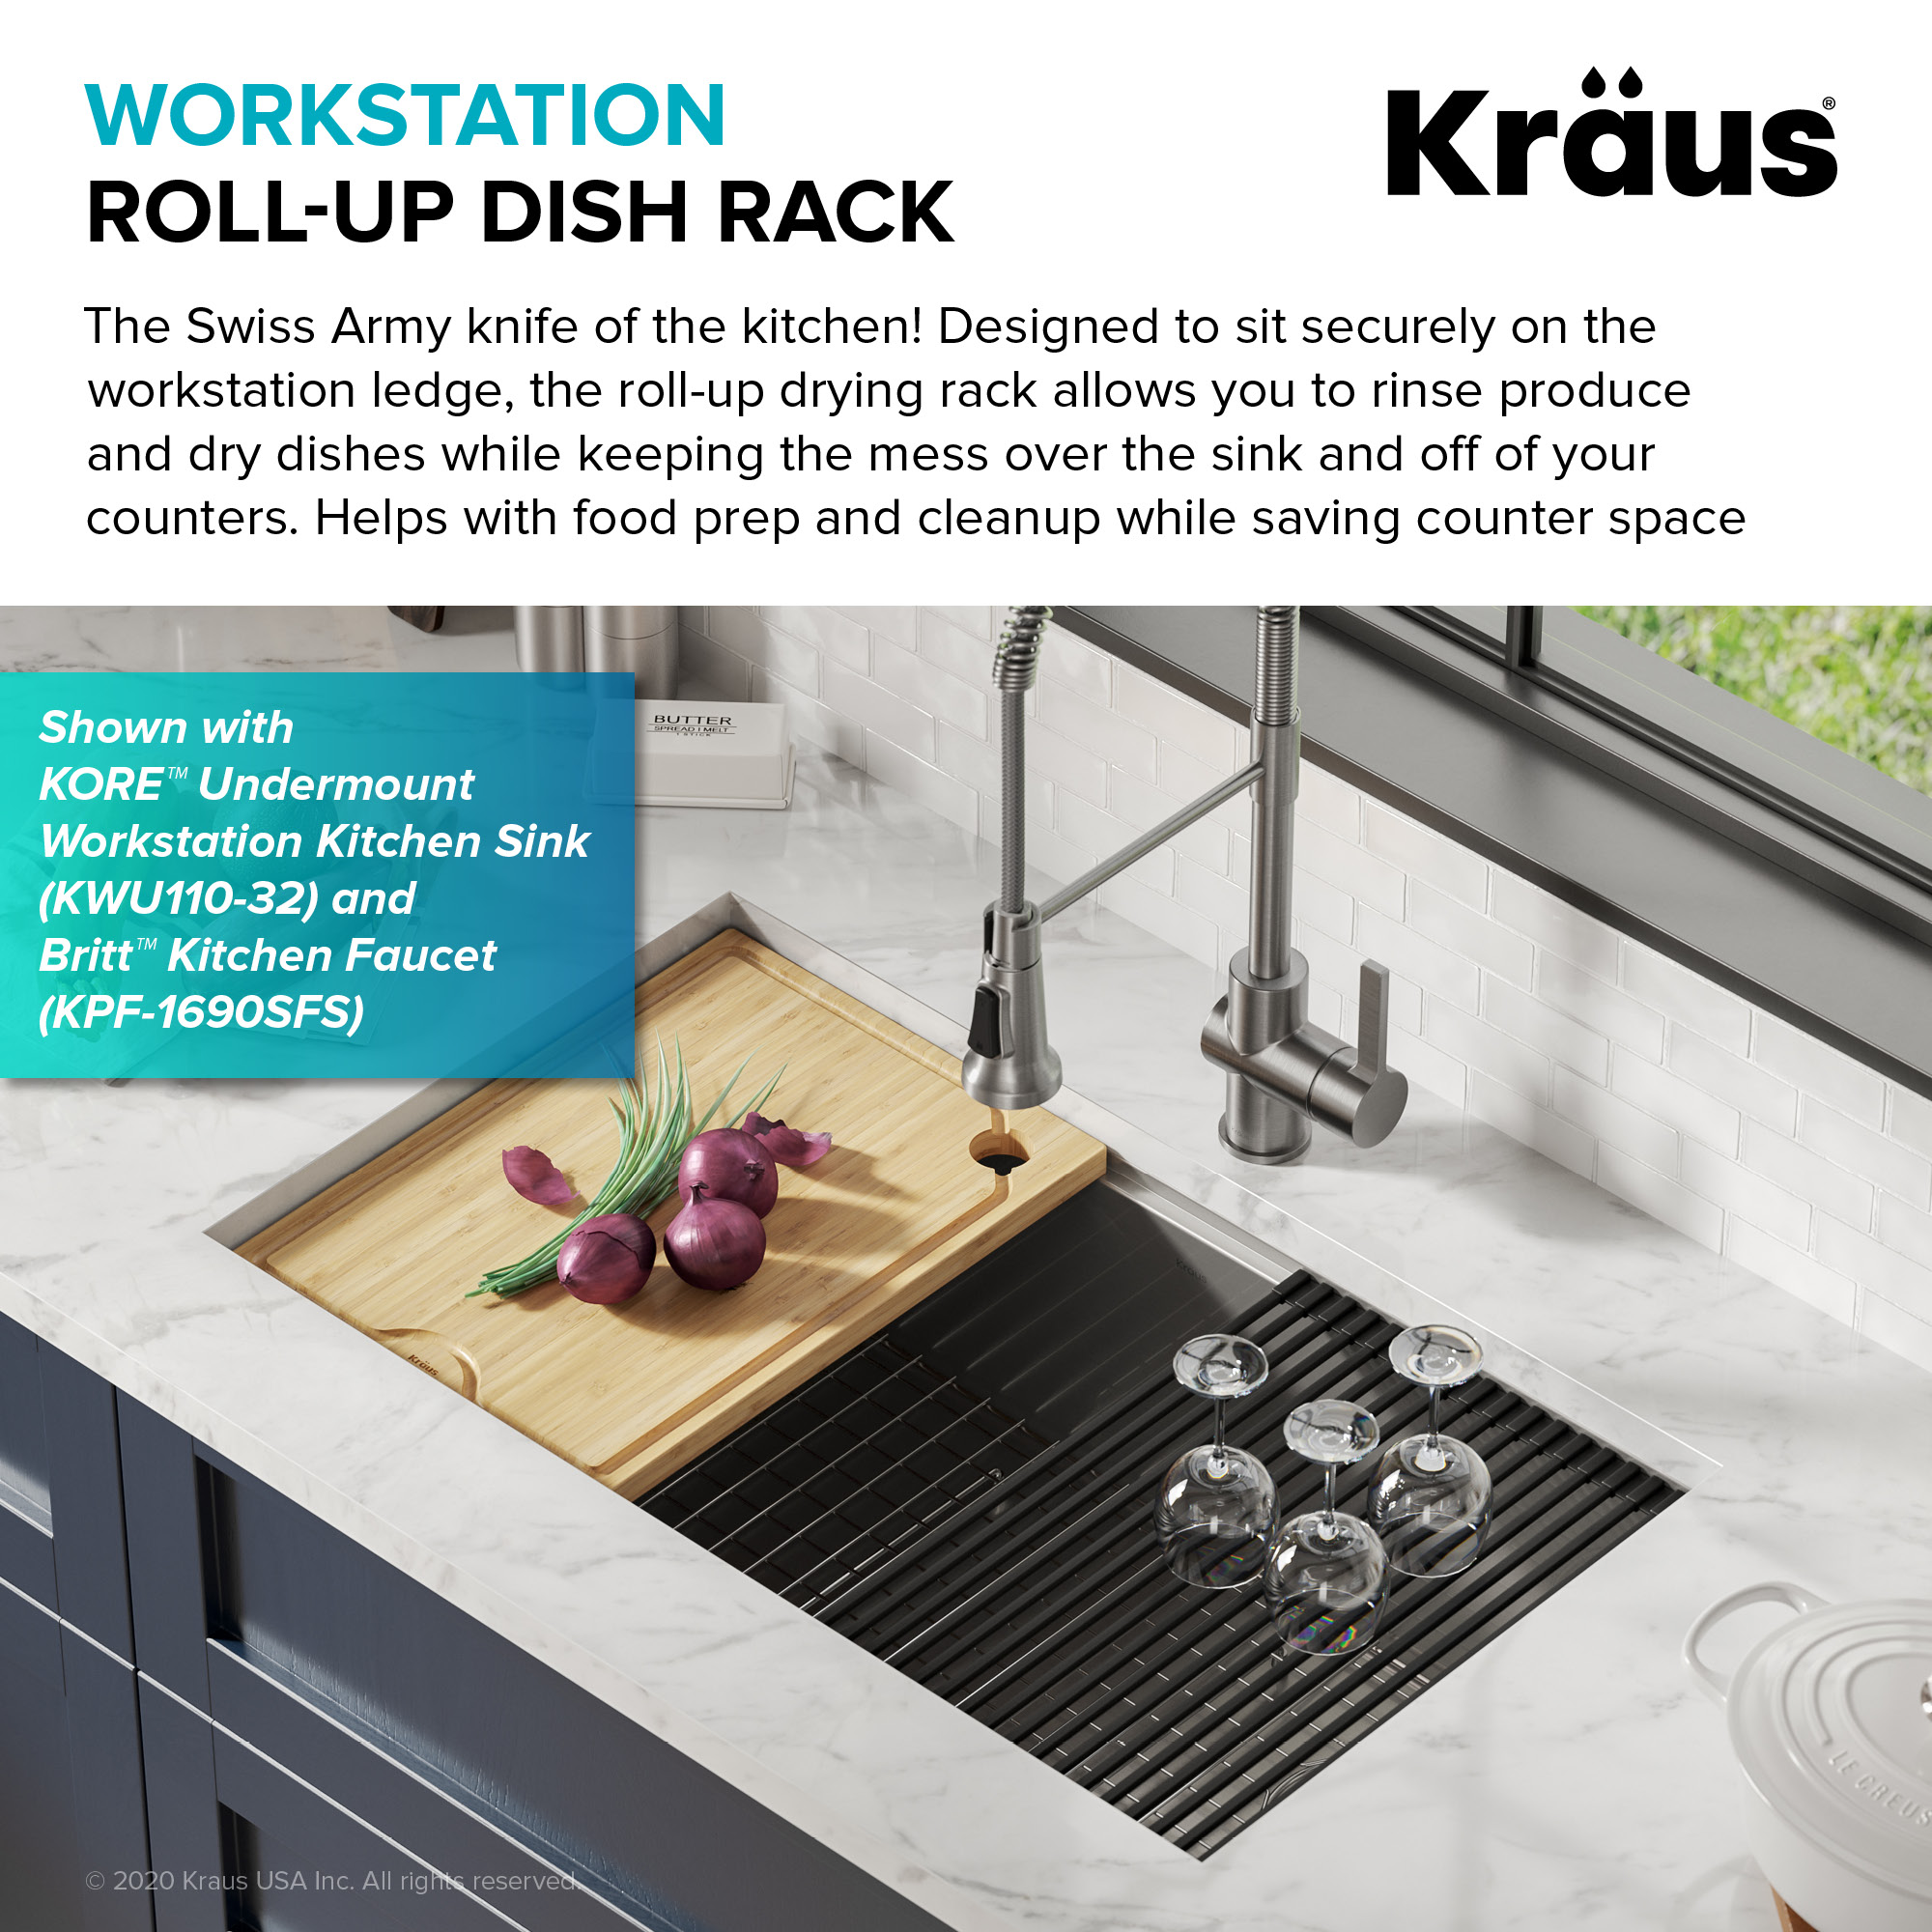 Kraus 8.125-in x 14.75-in Silicone Sink Mat at